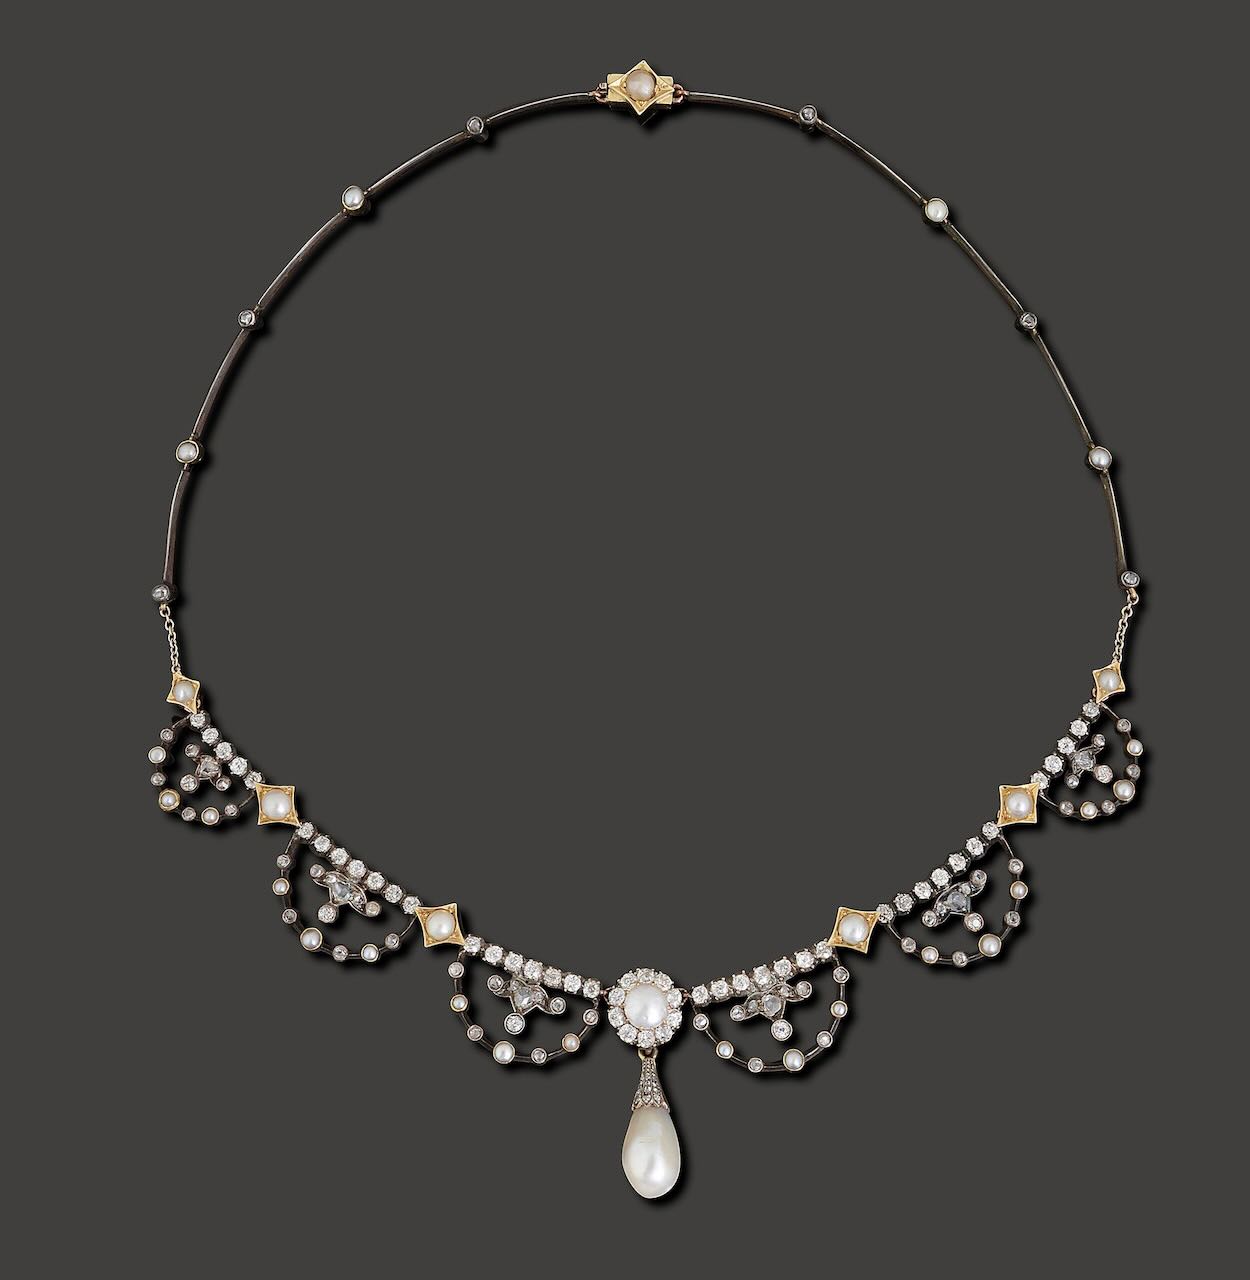 A mid/late 19th century pearl and diamond-set necklace - Image 4 of 10